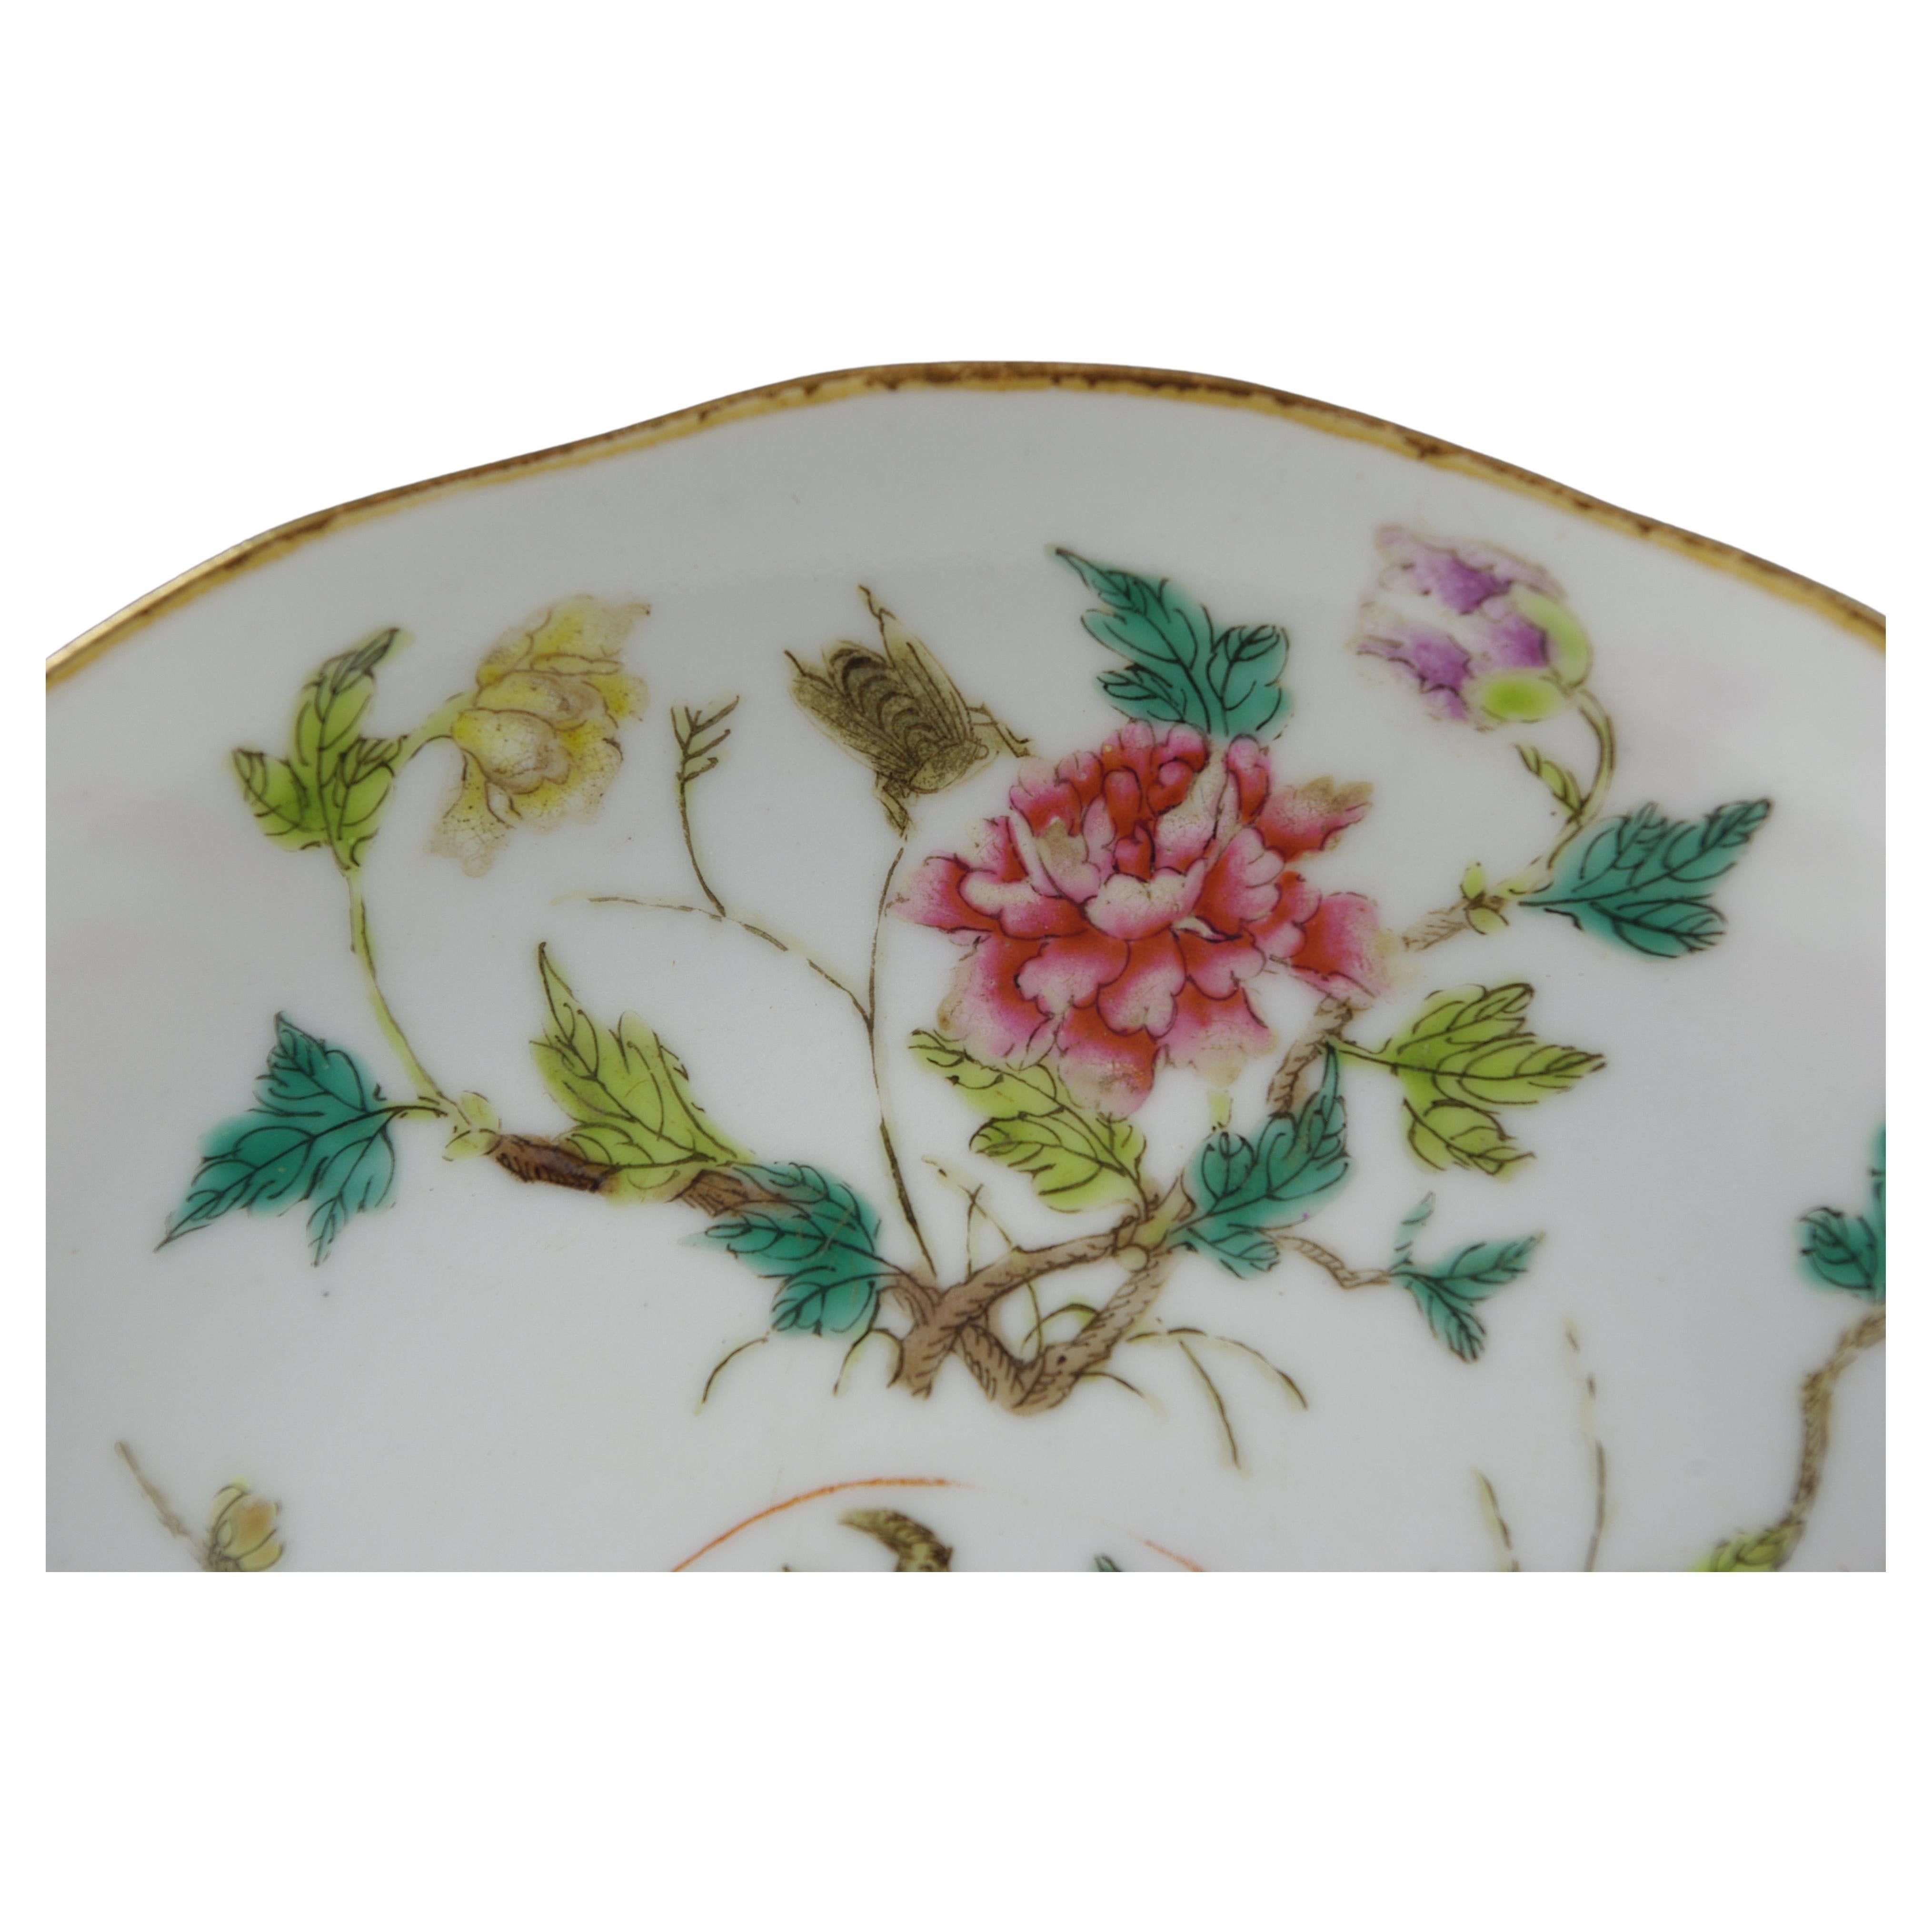 Antique Chinese Porcelain Famille Rose Fencai Saucer Dish 5 Flowers Daoguang 19c In Good Condition For Sale In Richmond, CA